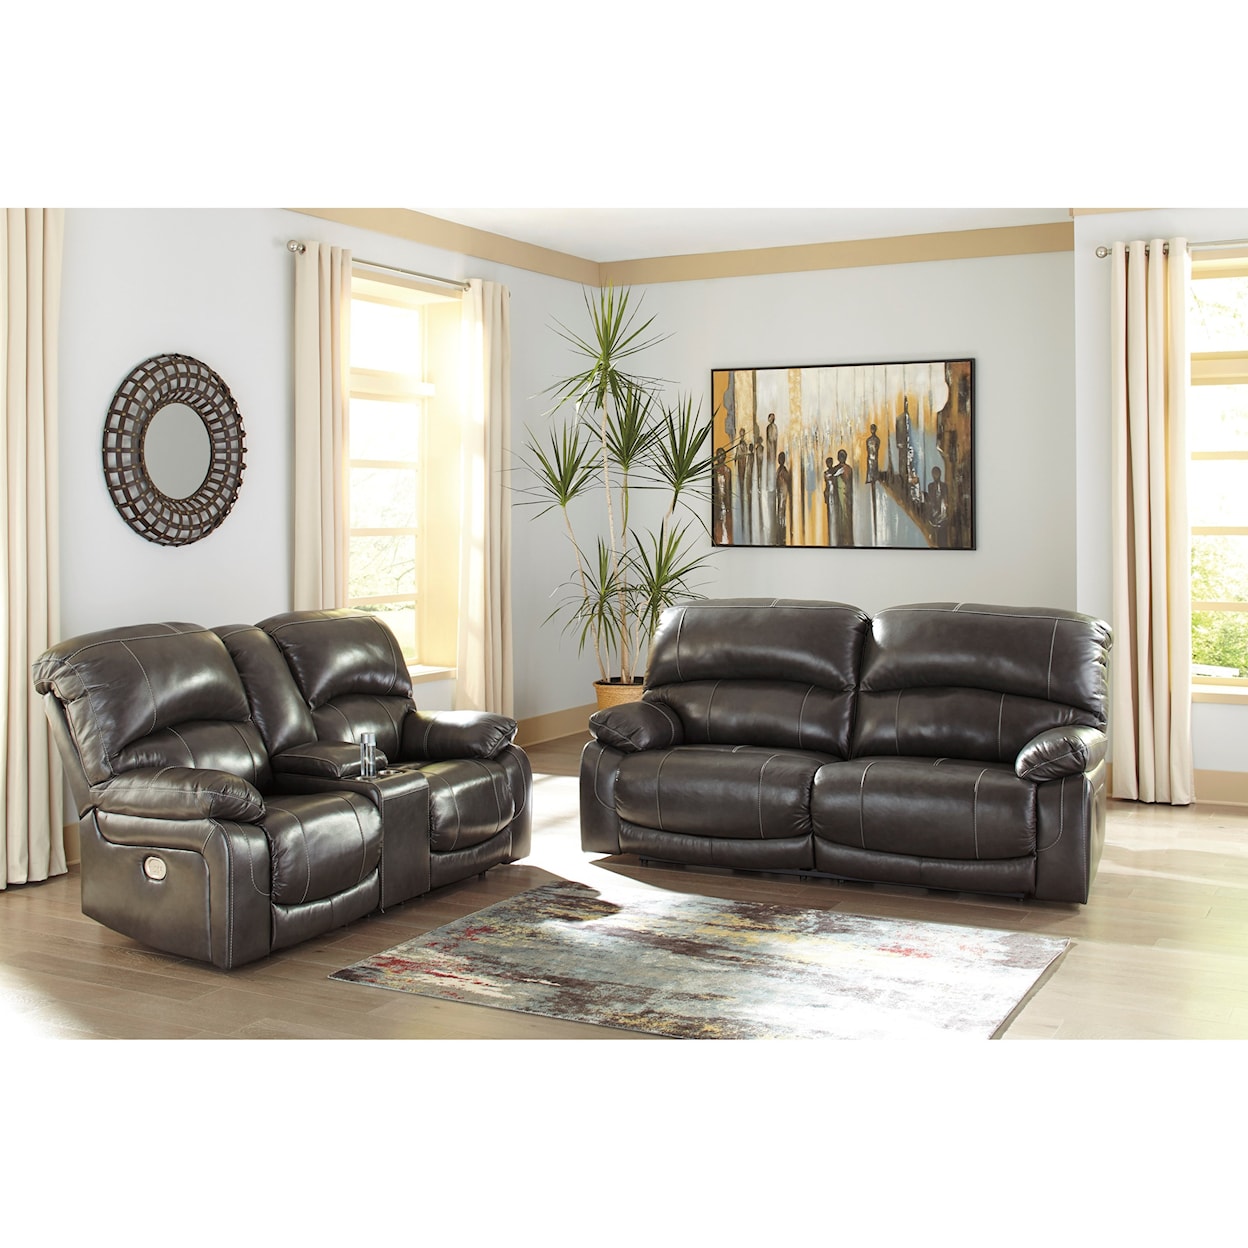 Signature Design by Ashley Hallstrung Power Reclining Living Room Group